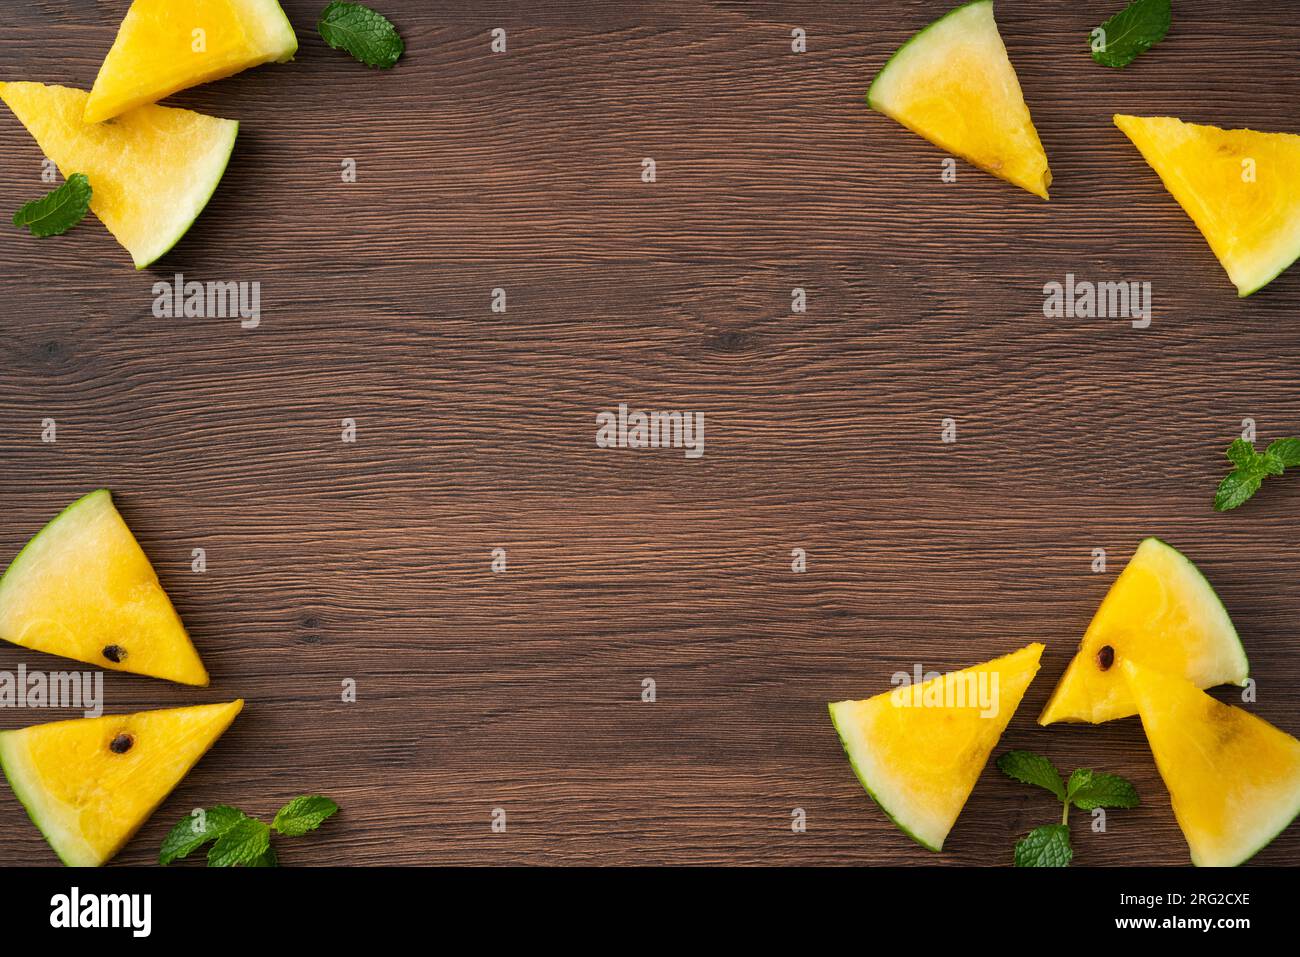 Sliced yellow golden watermelon pattern flat lay on wooden table background. Stock Photo